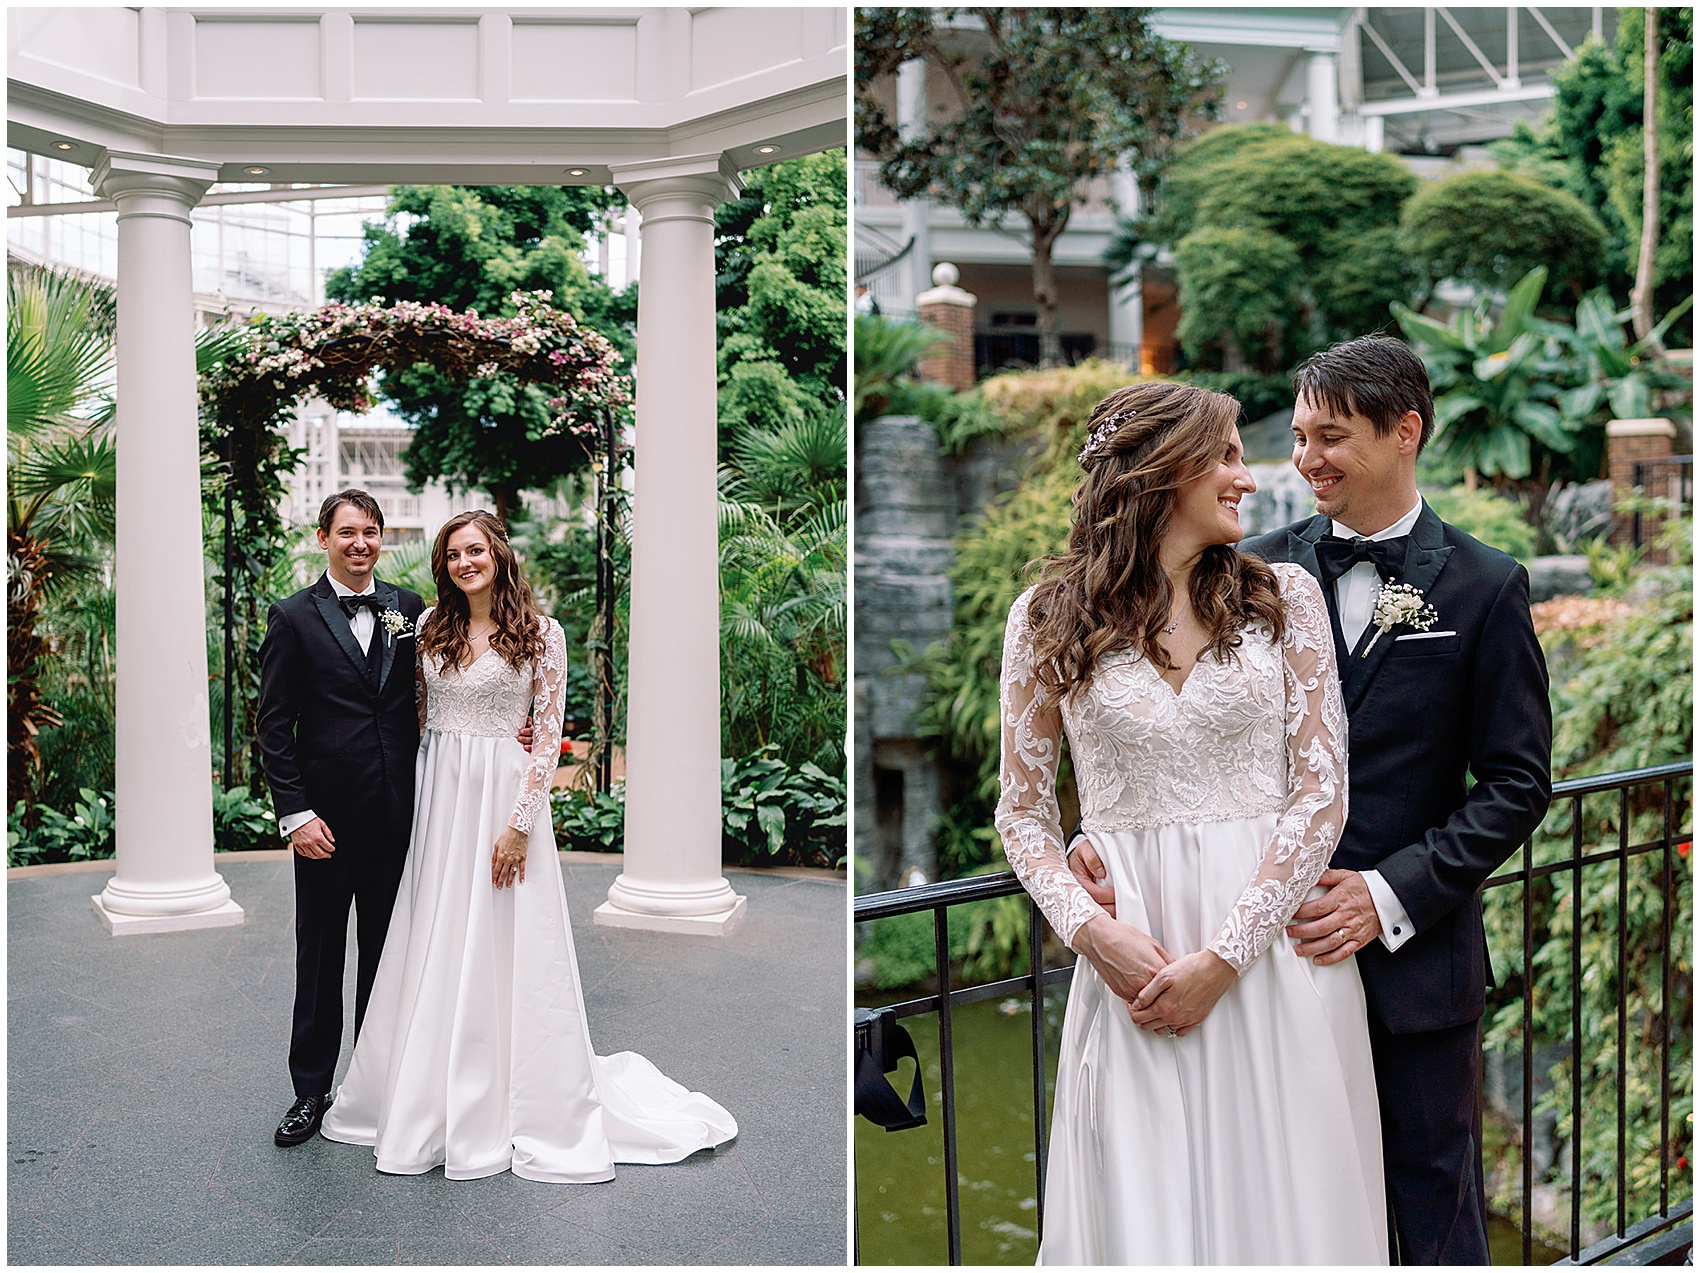 Newlyweds stand together in an indoor garden smiling and holding each other